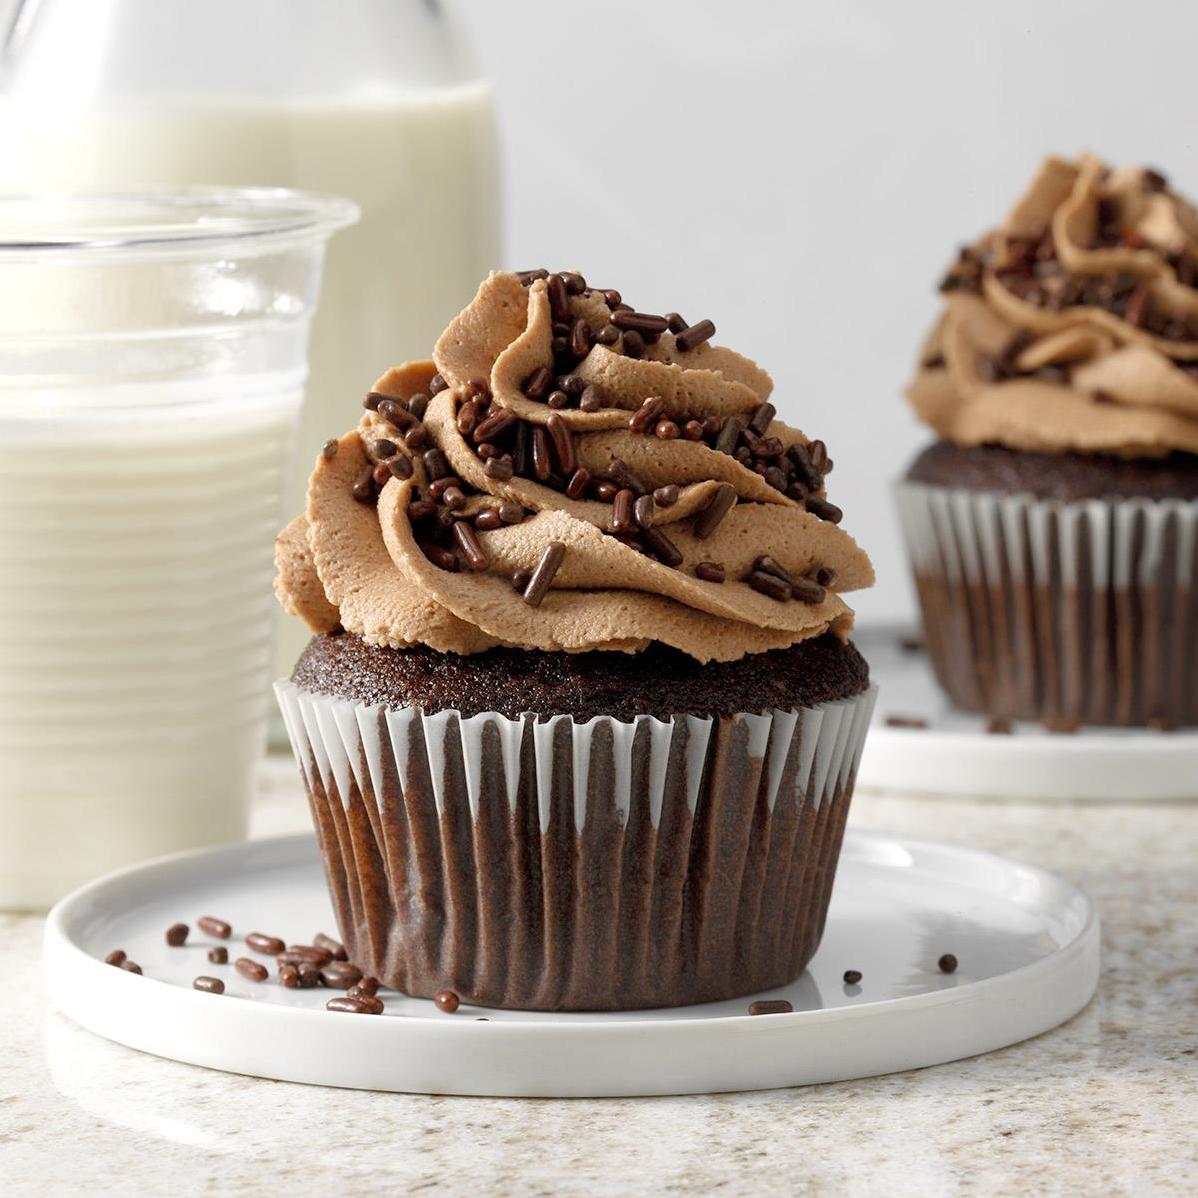  These cupcakes will satisfy your cravings for caffeine and sweetness all in one bite!